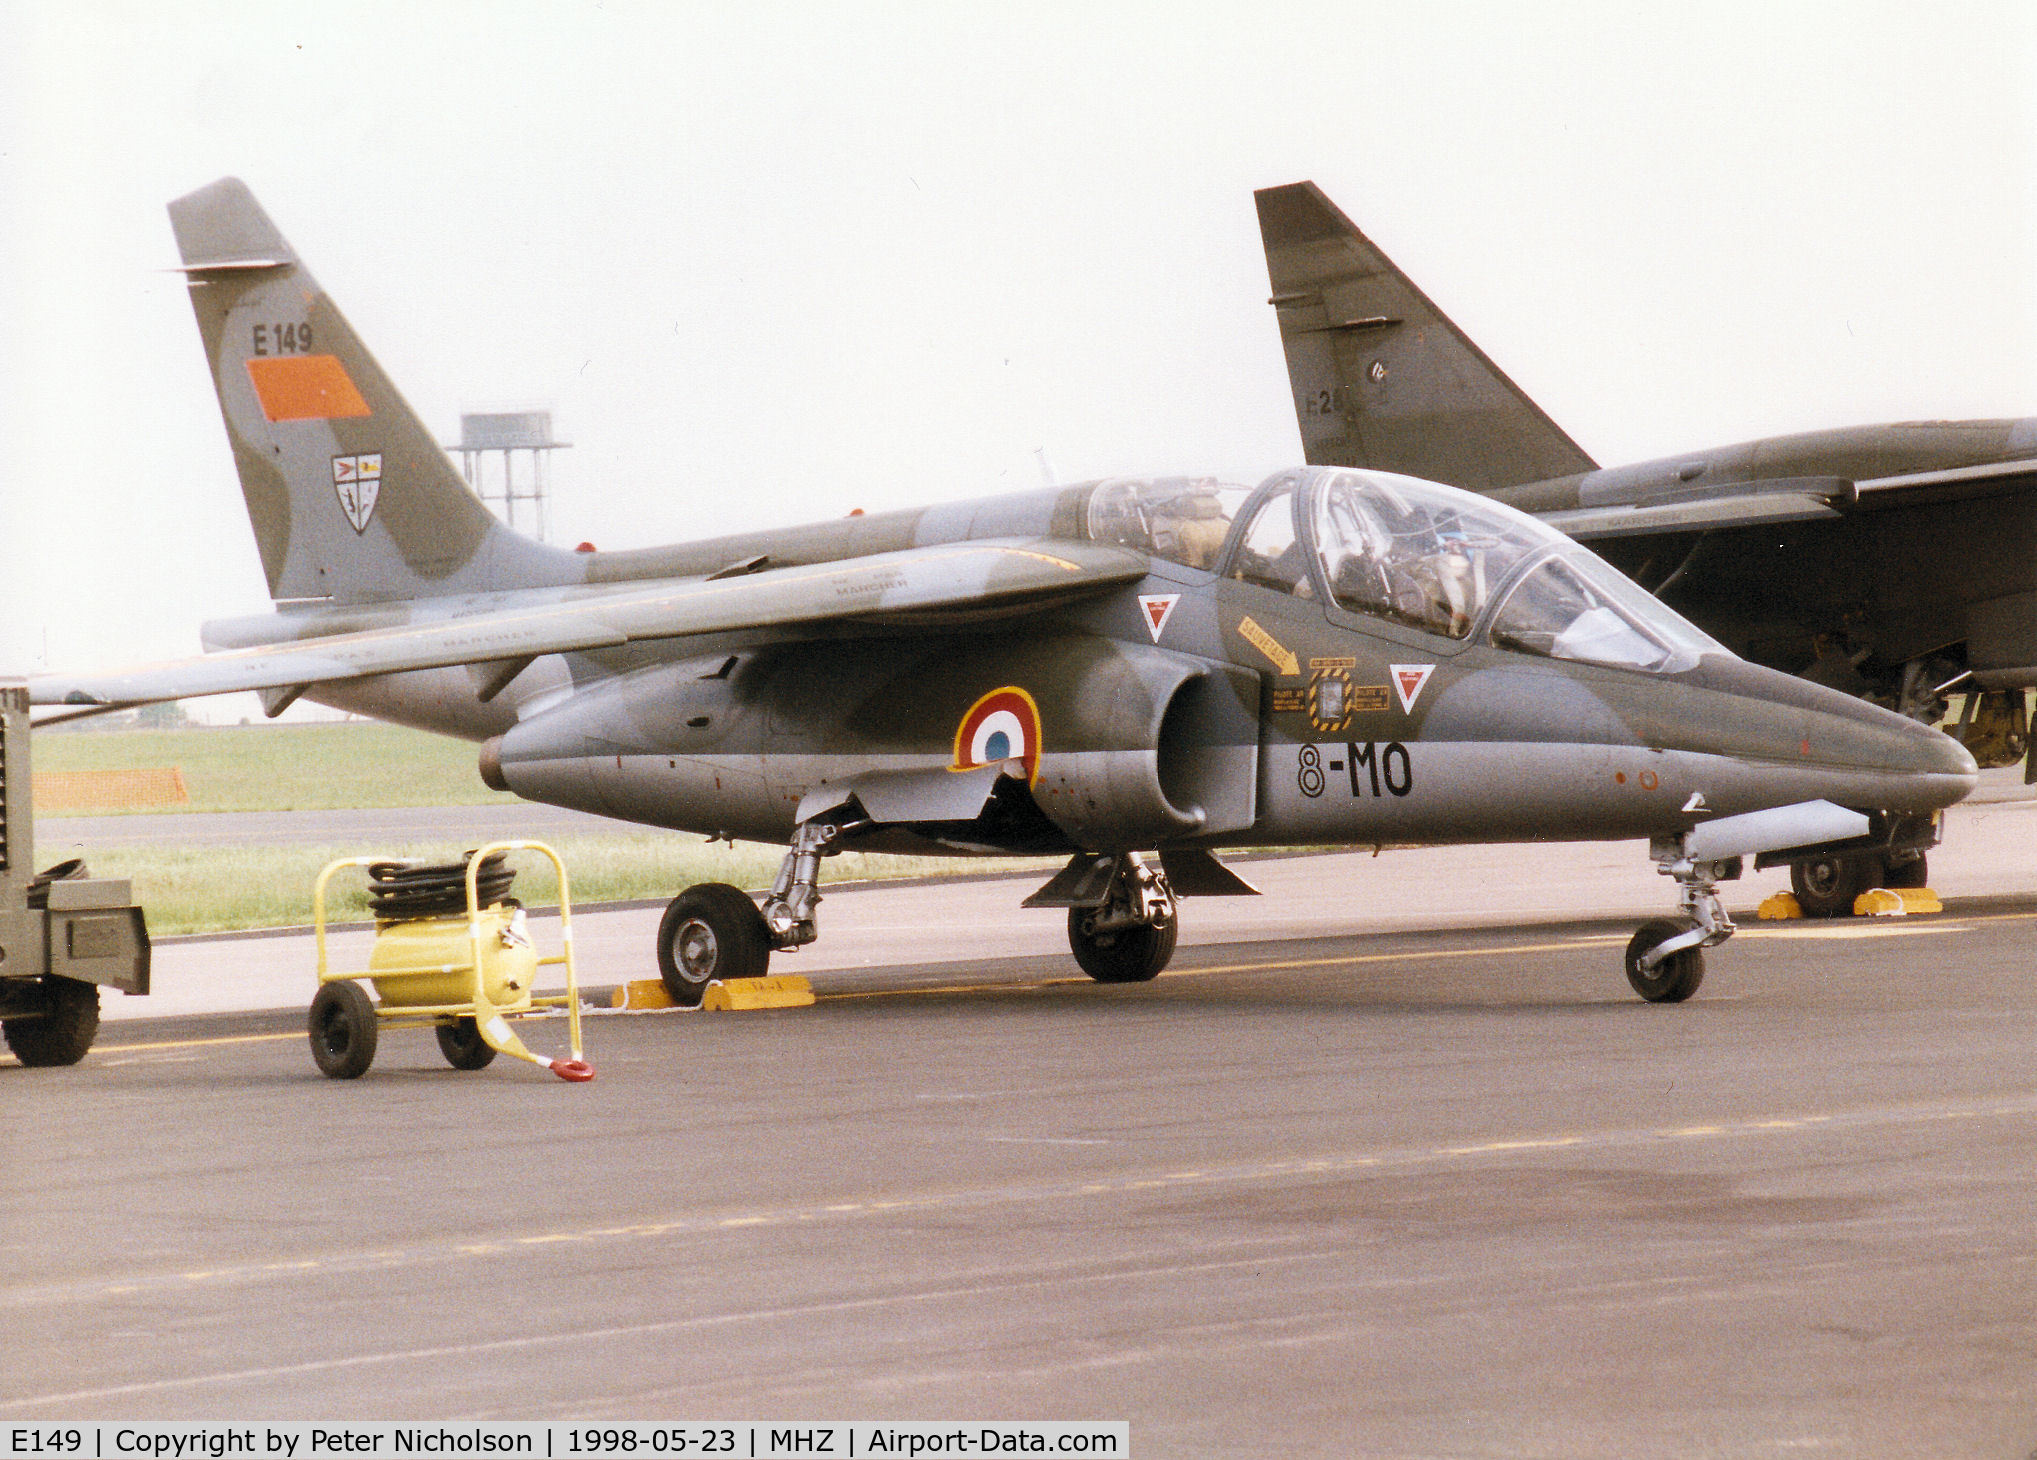 E149, Dassault-Dornier Alpha Jet E C/N E149, Alpha Jet of ETO 01.008 of the French Air Force at Cazaux on the flight-line at the 1998 RAF Mildenhall Air Fete.